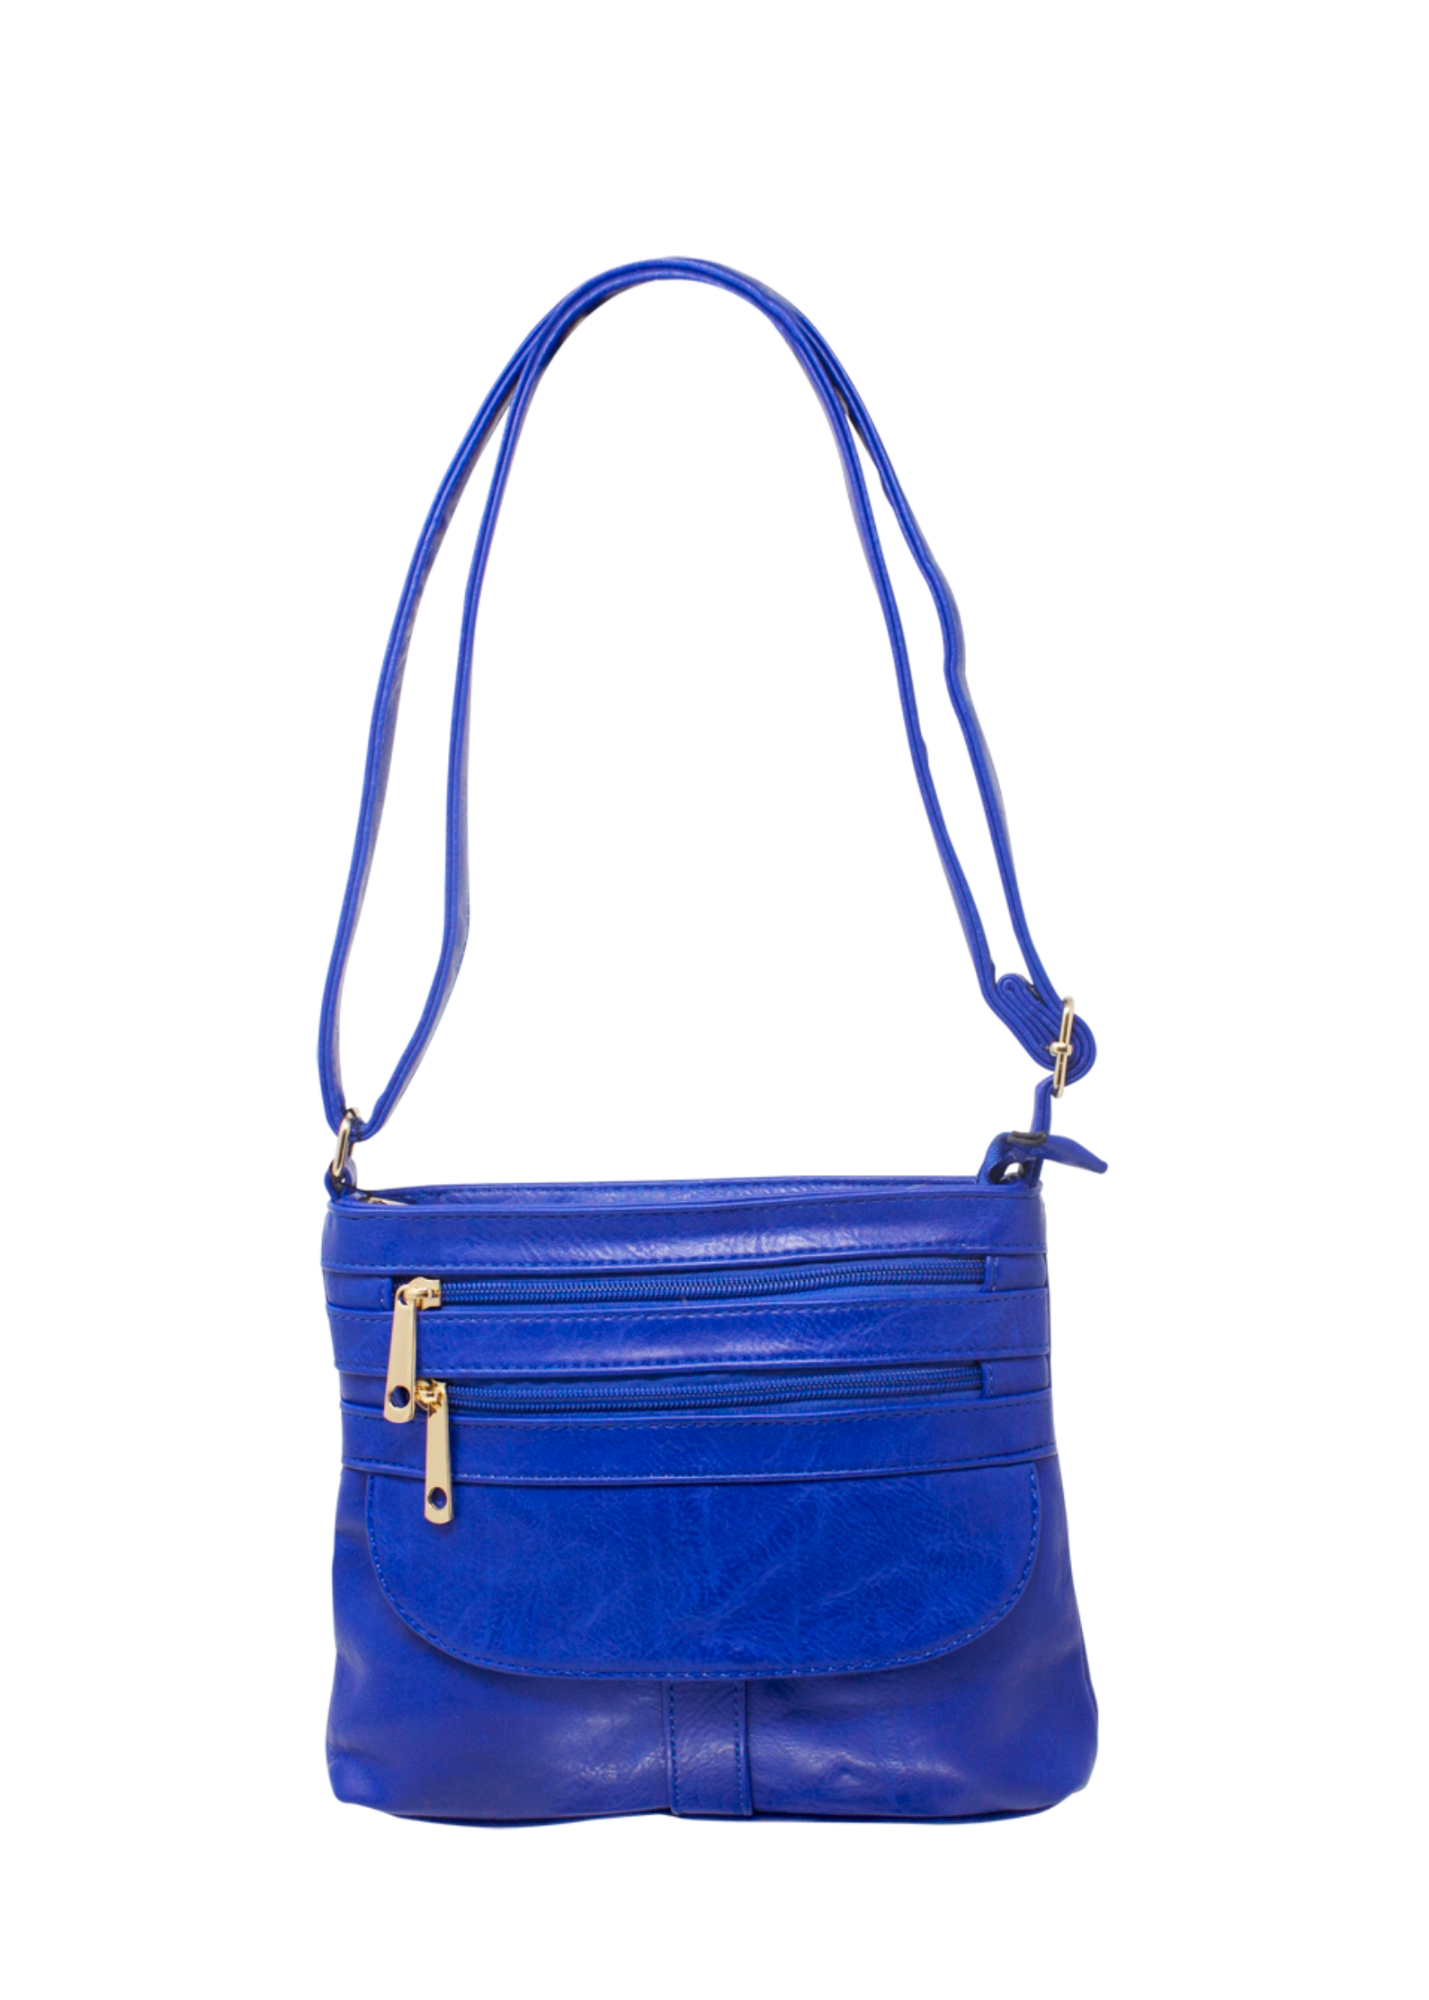 Thunder Egg - Vintage Style Faux Leather Cross-body Bag in Royal Blue